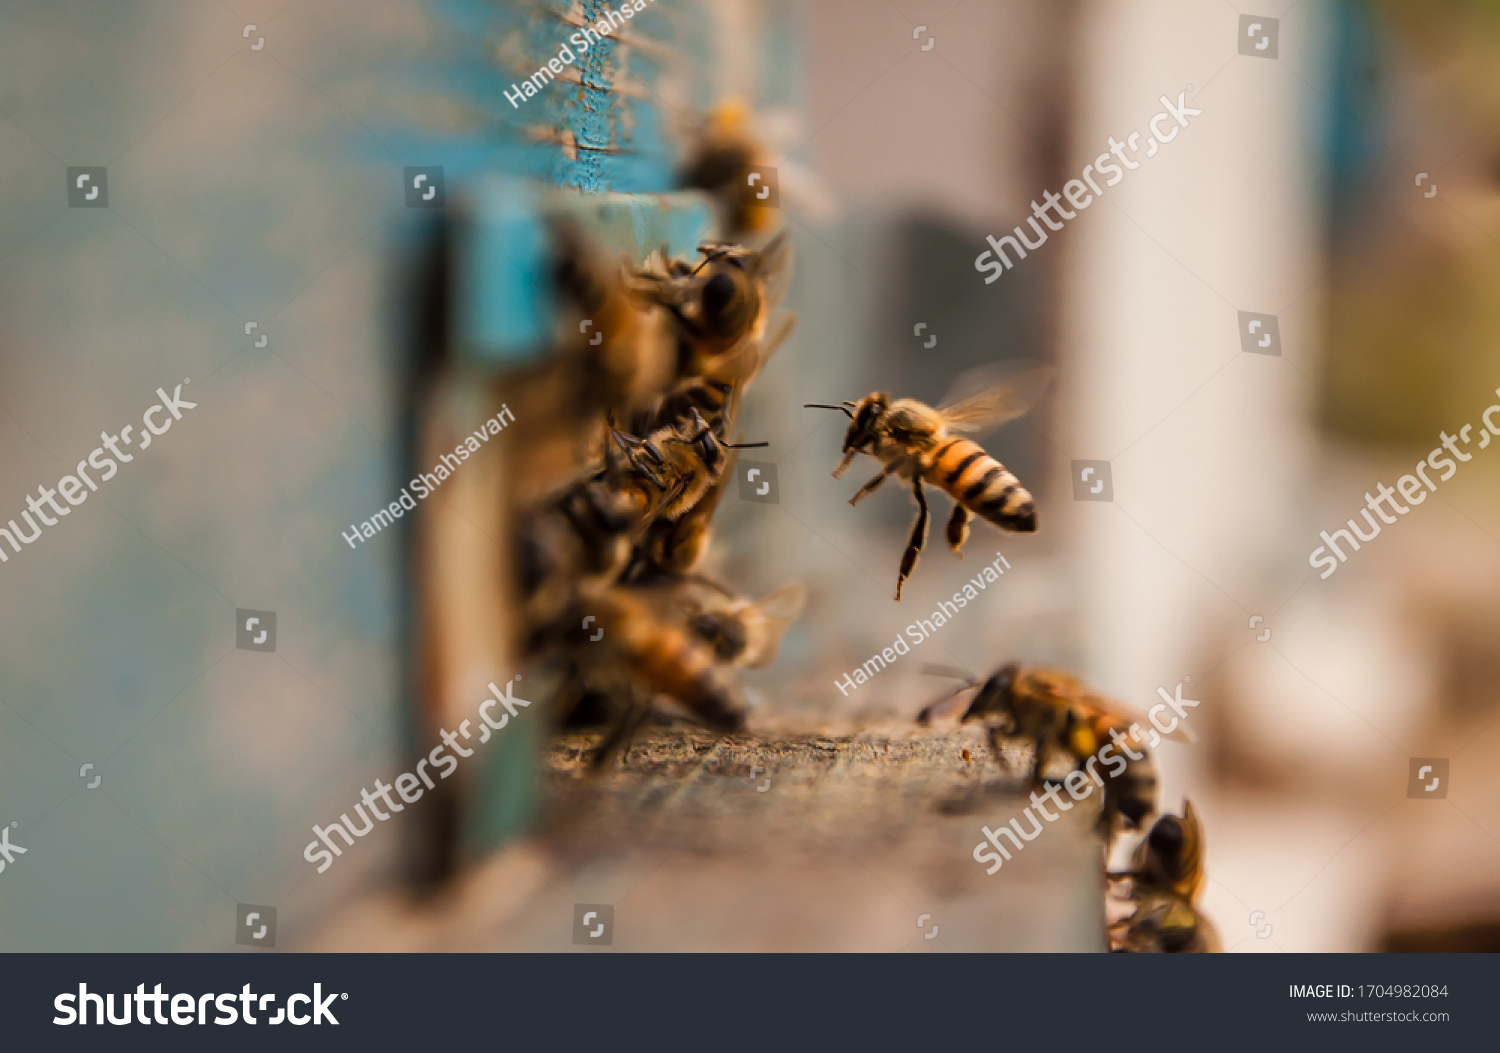 detailed view of working bees in a bee hive. blurred background. Close up of flying bees. Wooden beehive and bees. bees flying back in hive after an intense harvest period. #1704982084